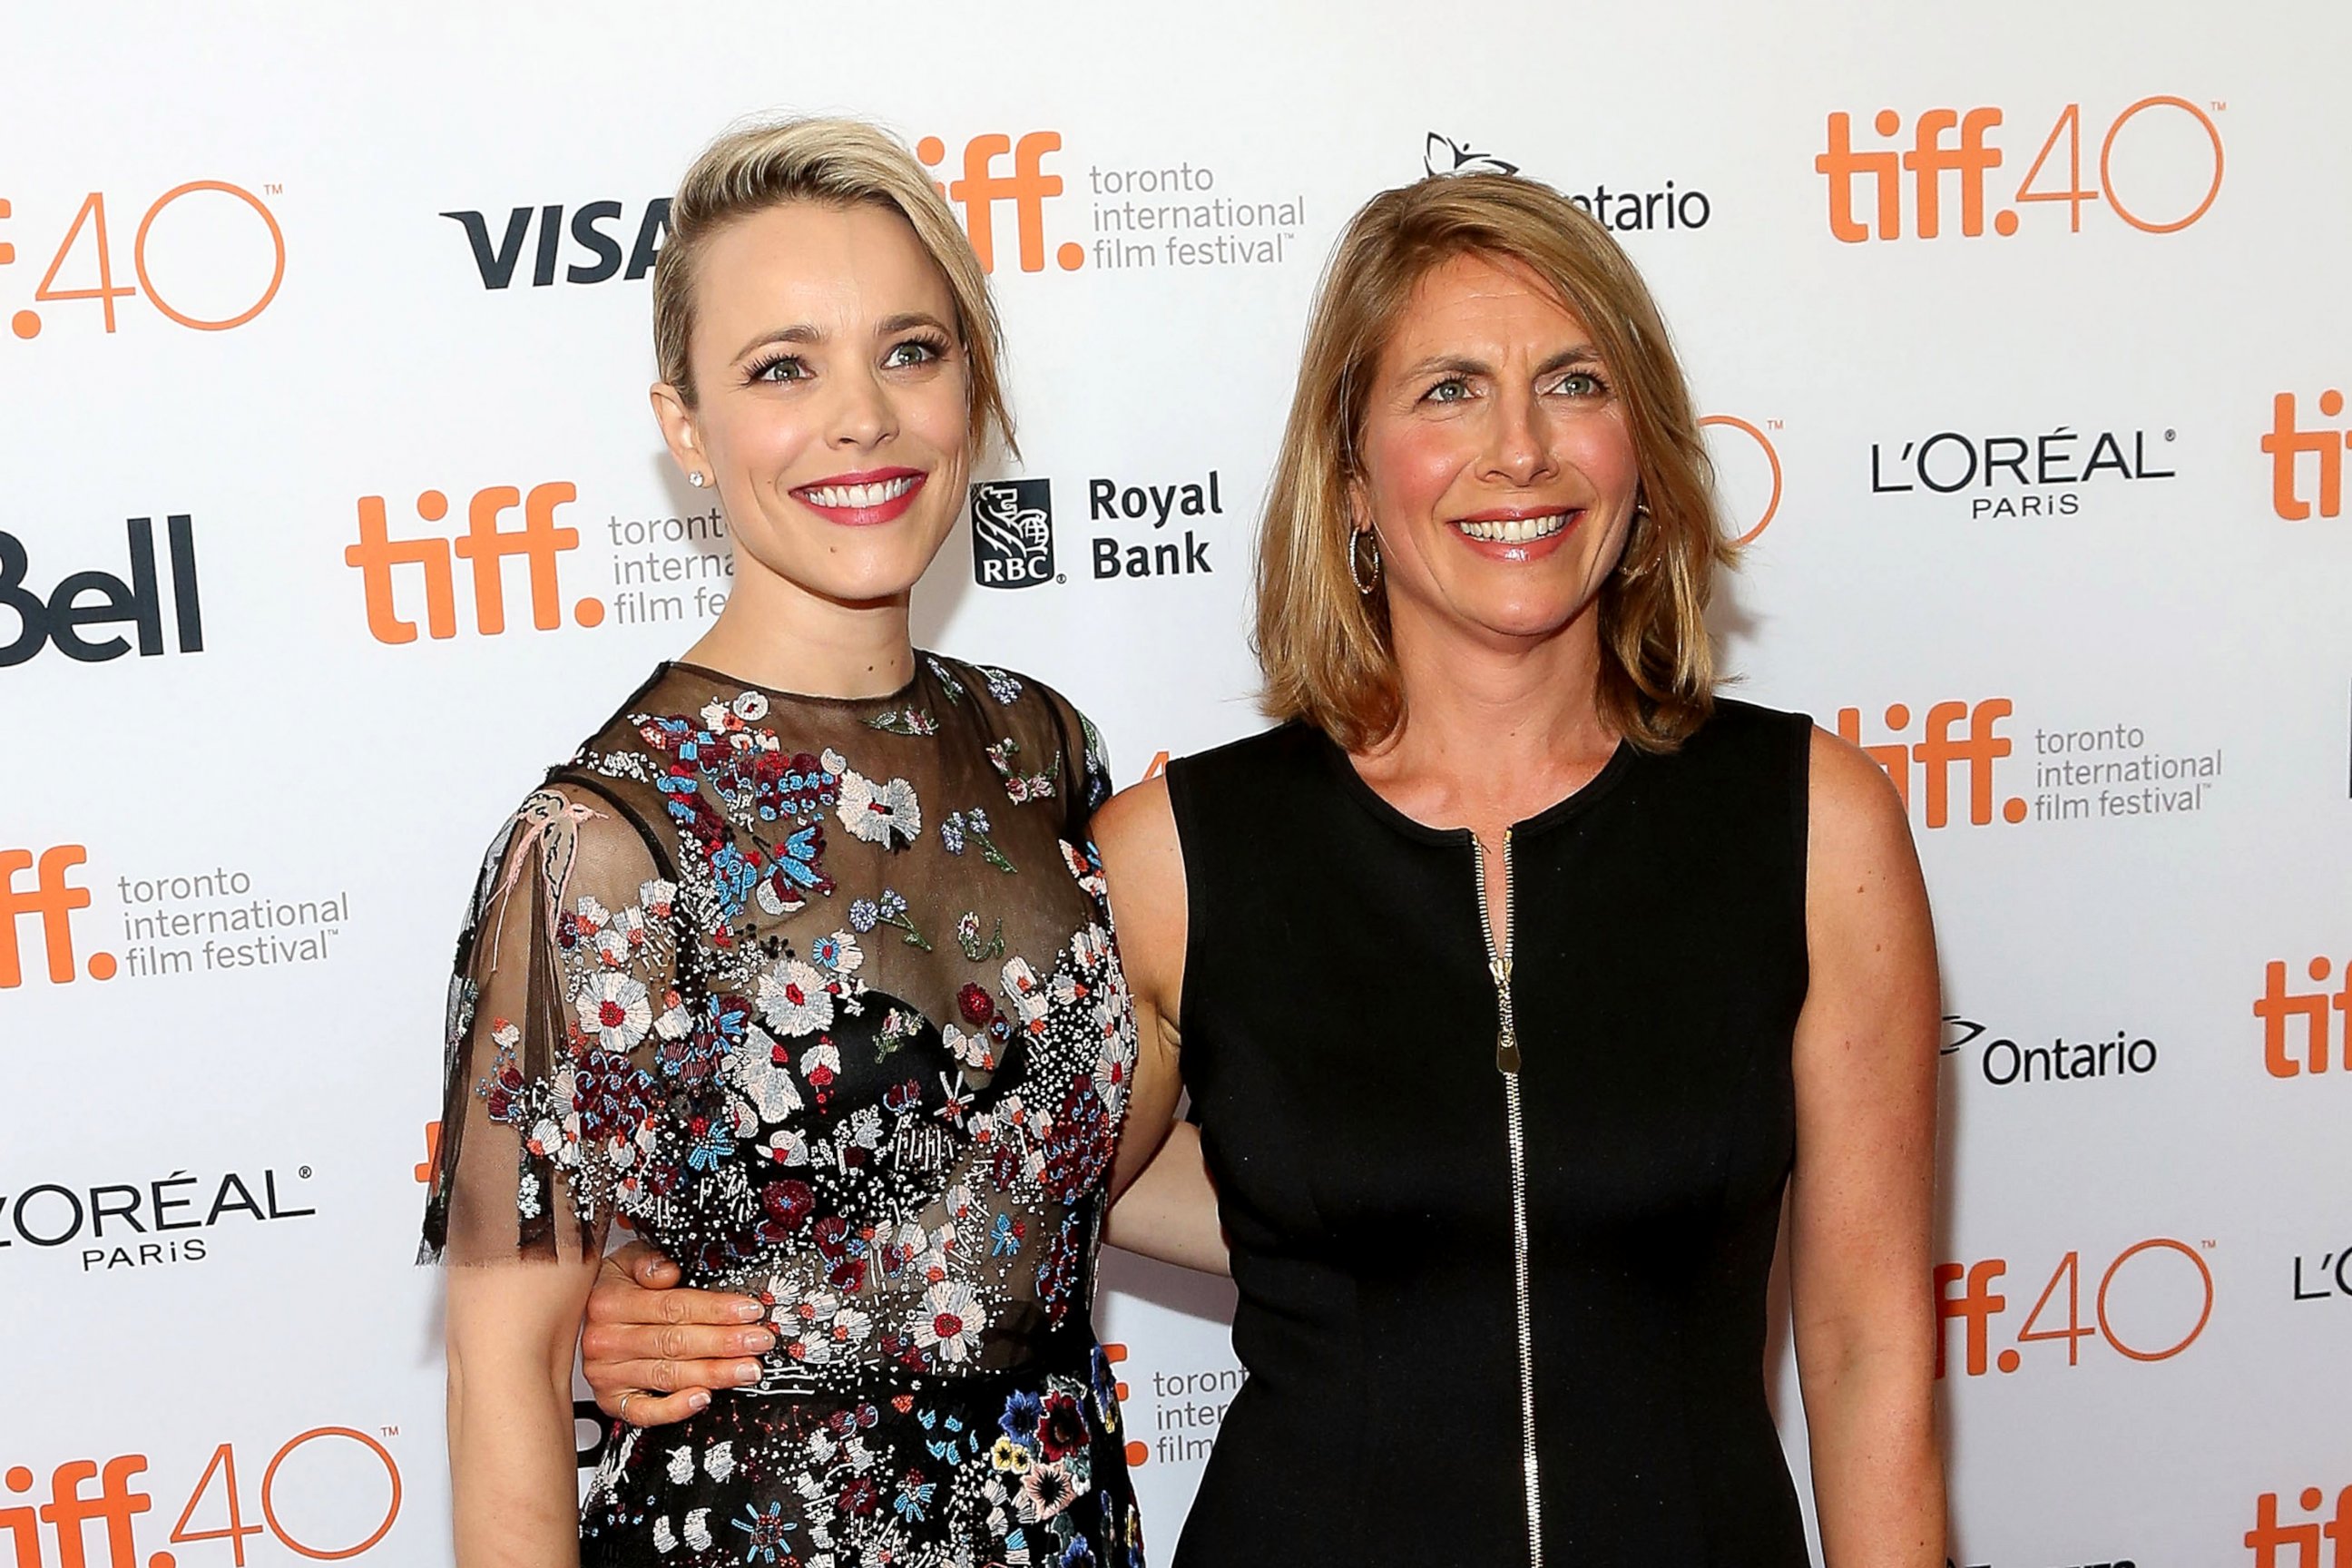 PHOTO: Rachel McAdams, left, and Sasha Pfeiffer pose together at the premiere of "Spotlight" at Princess of Wales Theatre during the 2015 Toronto International Film Festival, Sept. 14, 2015, in Toronto.